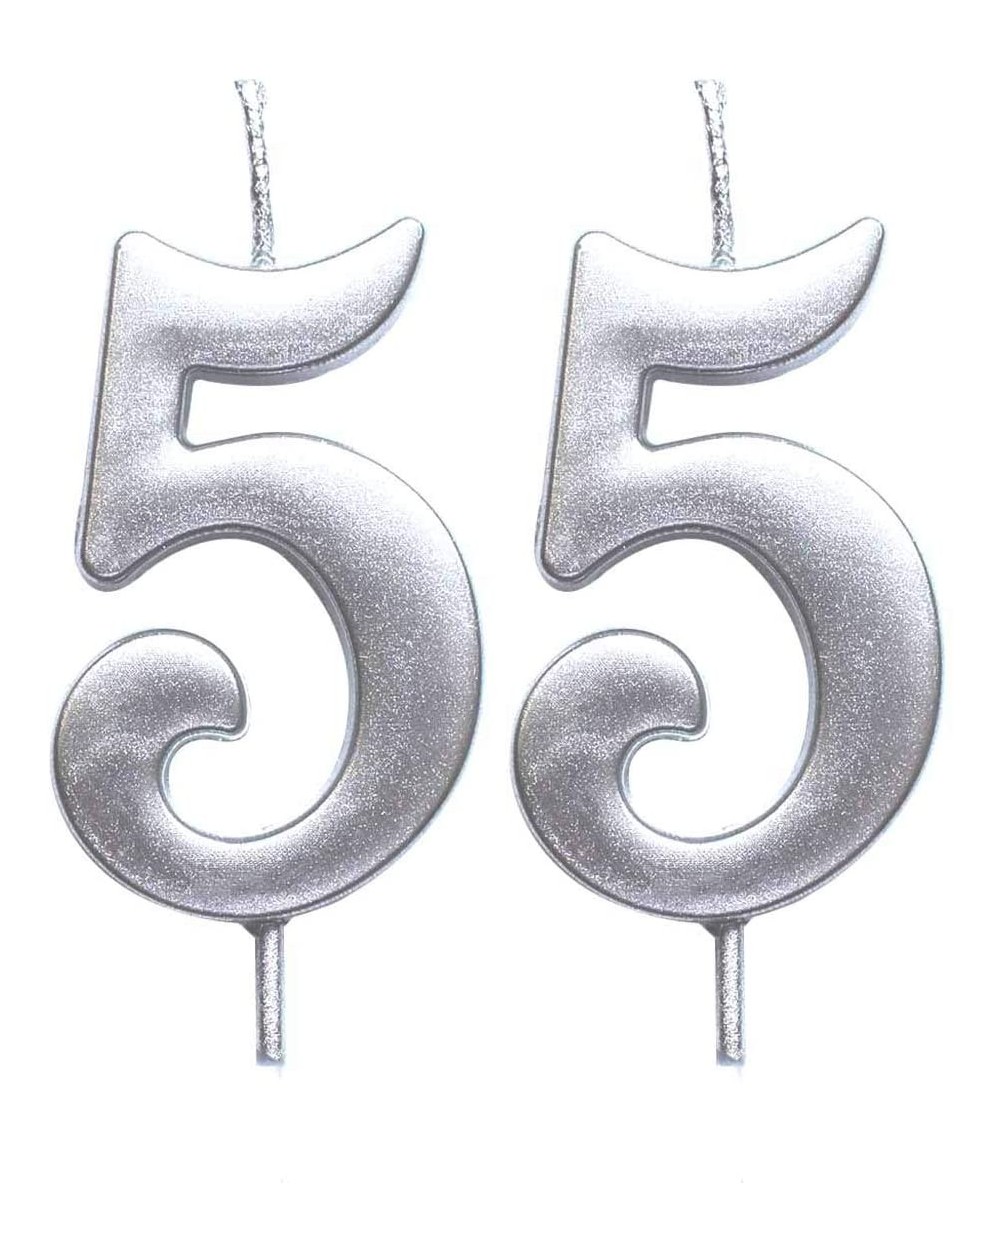 Cake Decorating Supplies Silver 55th Birthday Numeral Candle- Number 55 Cake Topper Candles Party Decoration for Women or Men...